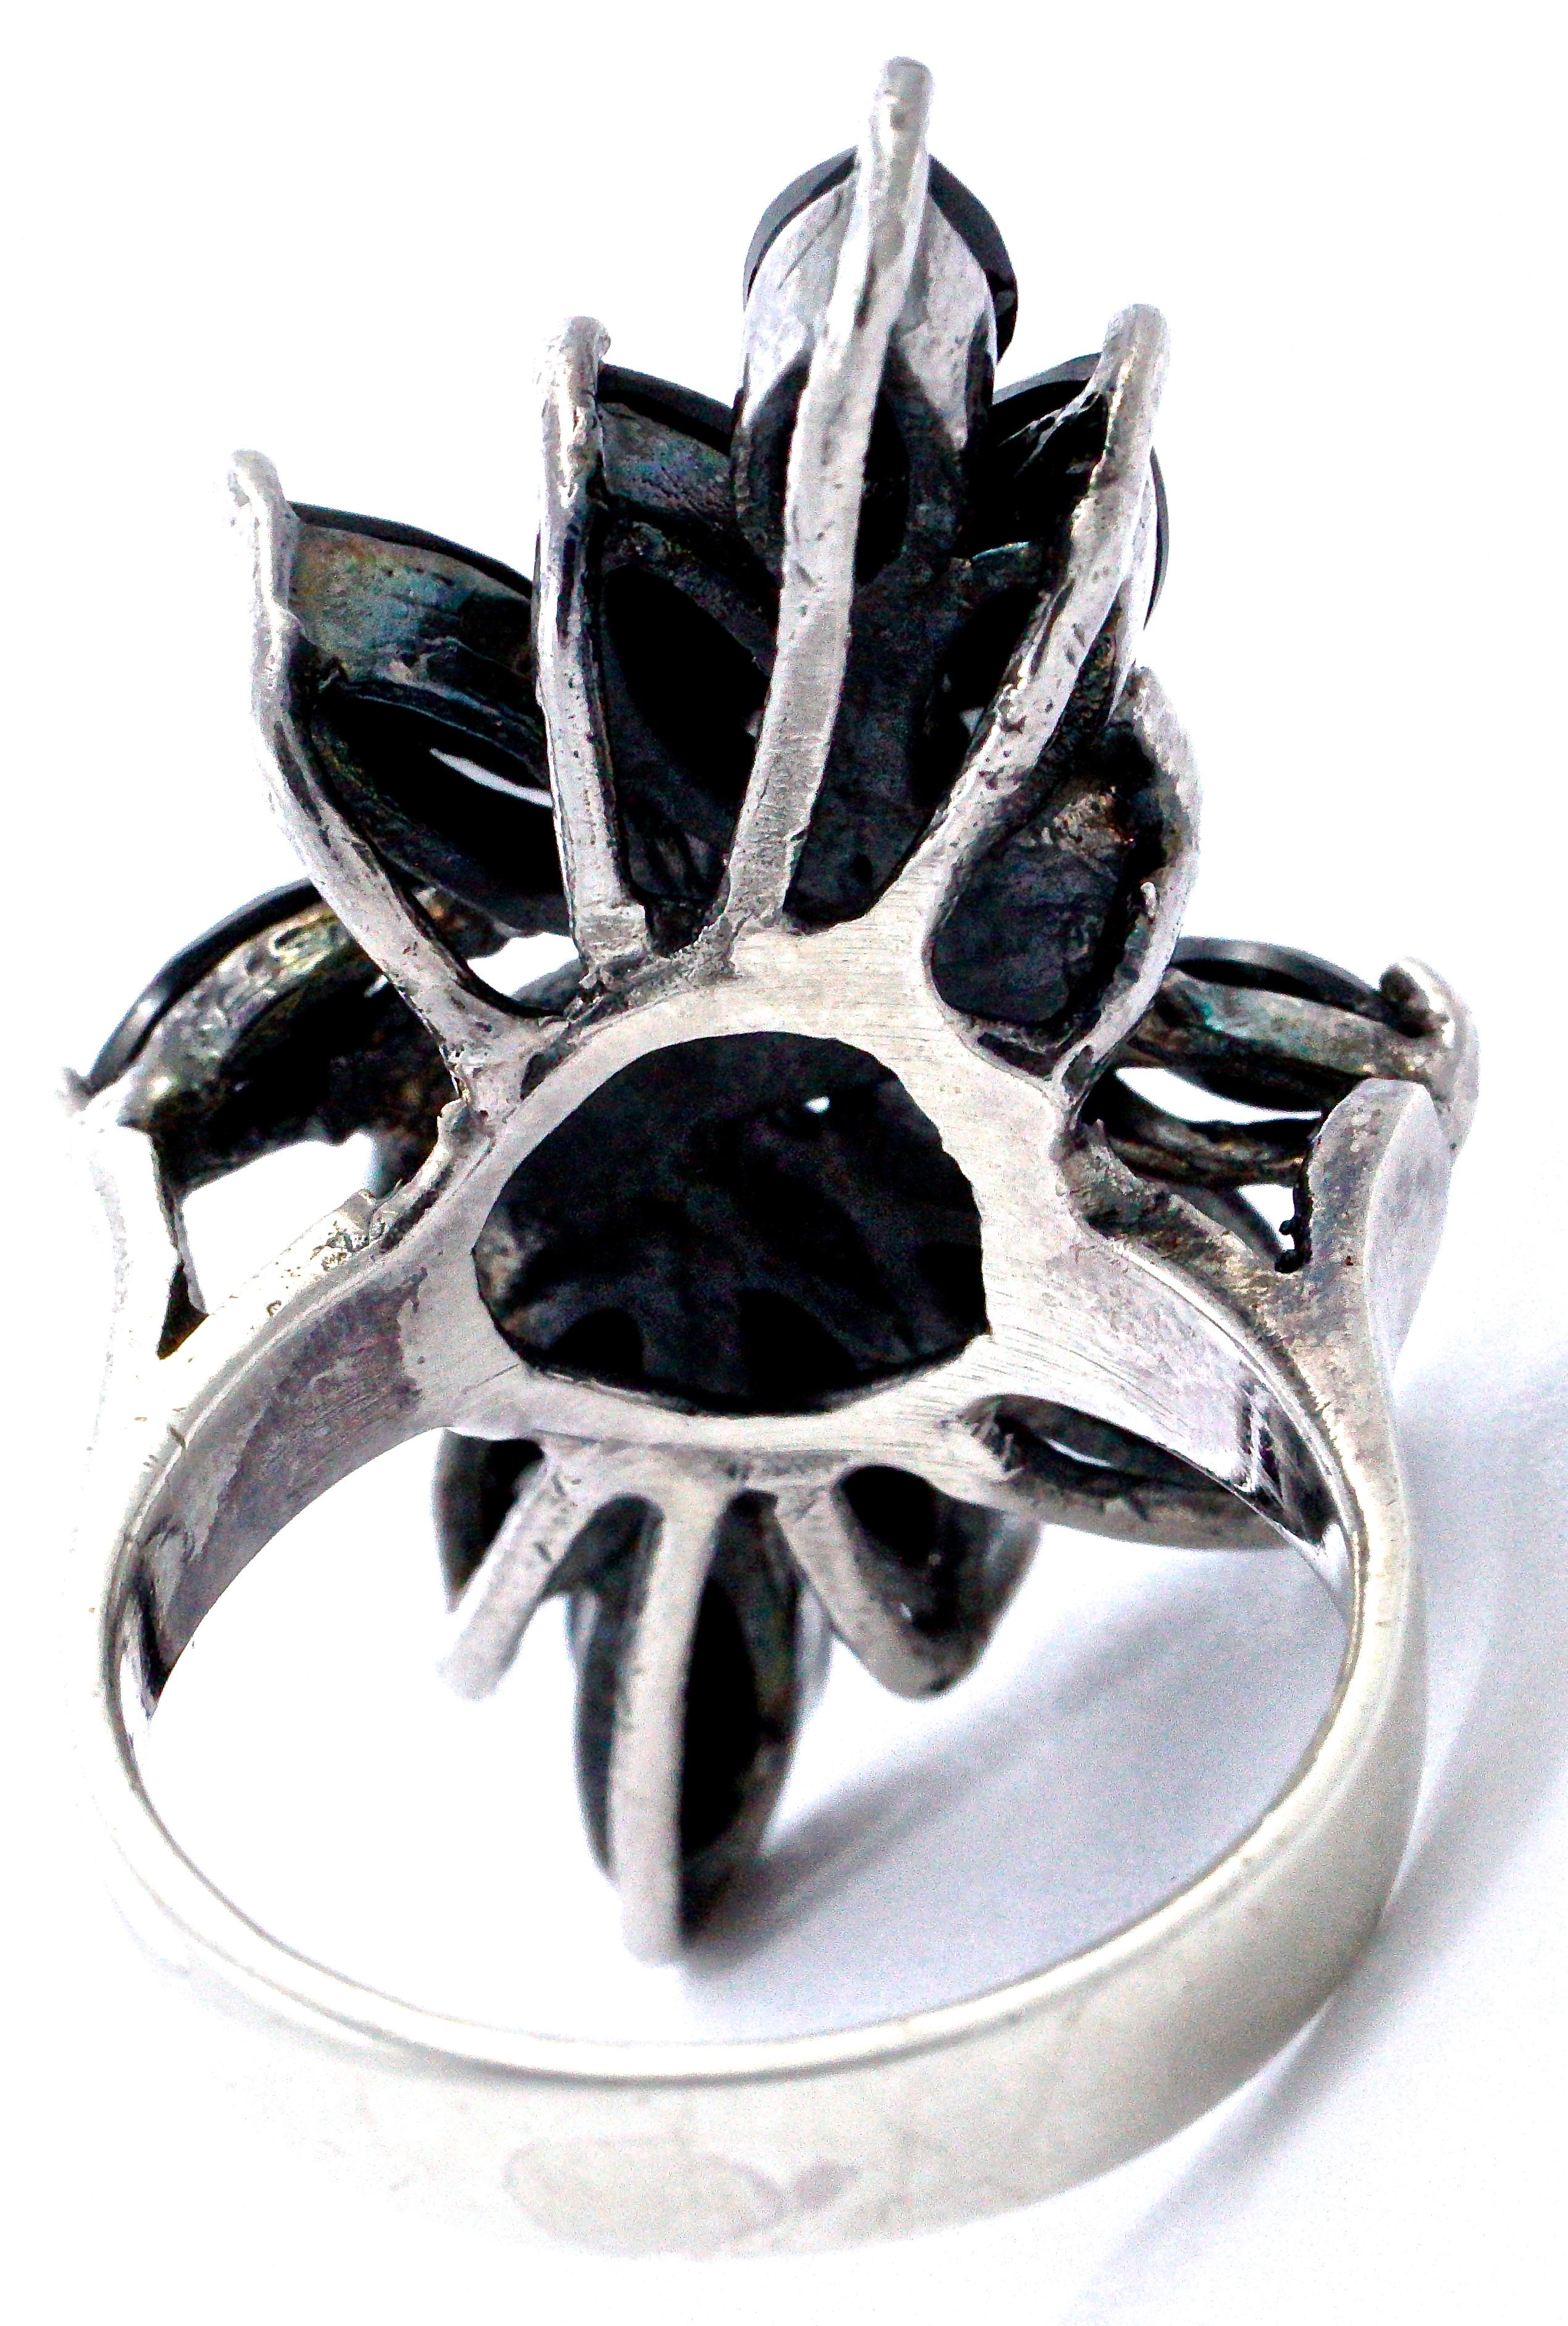 Stylish sterling silver ring featuring ten black glass marquise cut stones, divided by a row of marcasites with fancy edge decoration. The silver has some scratching, the black stones are in very good condition. Ring size UK M 1/2 / US 6 1/4, inside